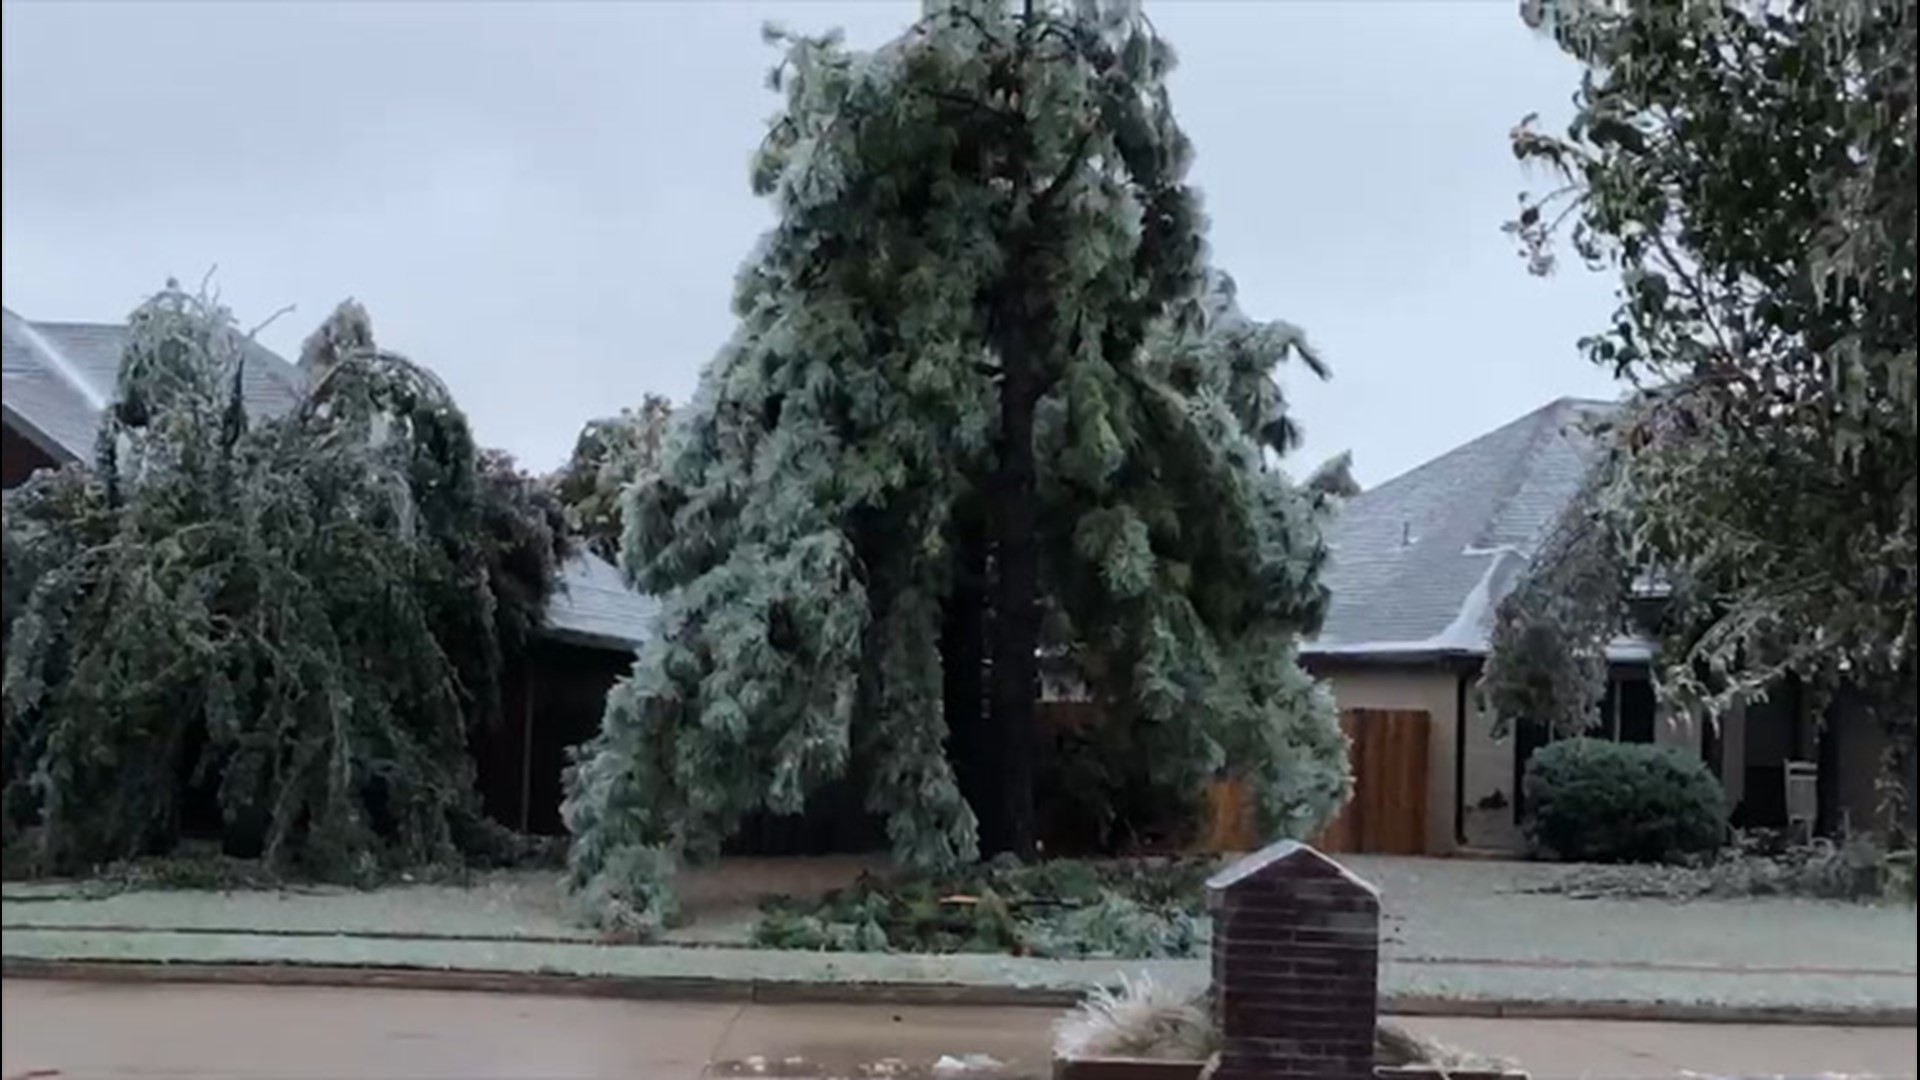 Ice weighed down on trees in this neighborhood in Mustang, Oklahoma, on Oct. 28. The weight was too much to bear as many trees collapsed causing damage.